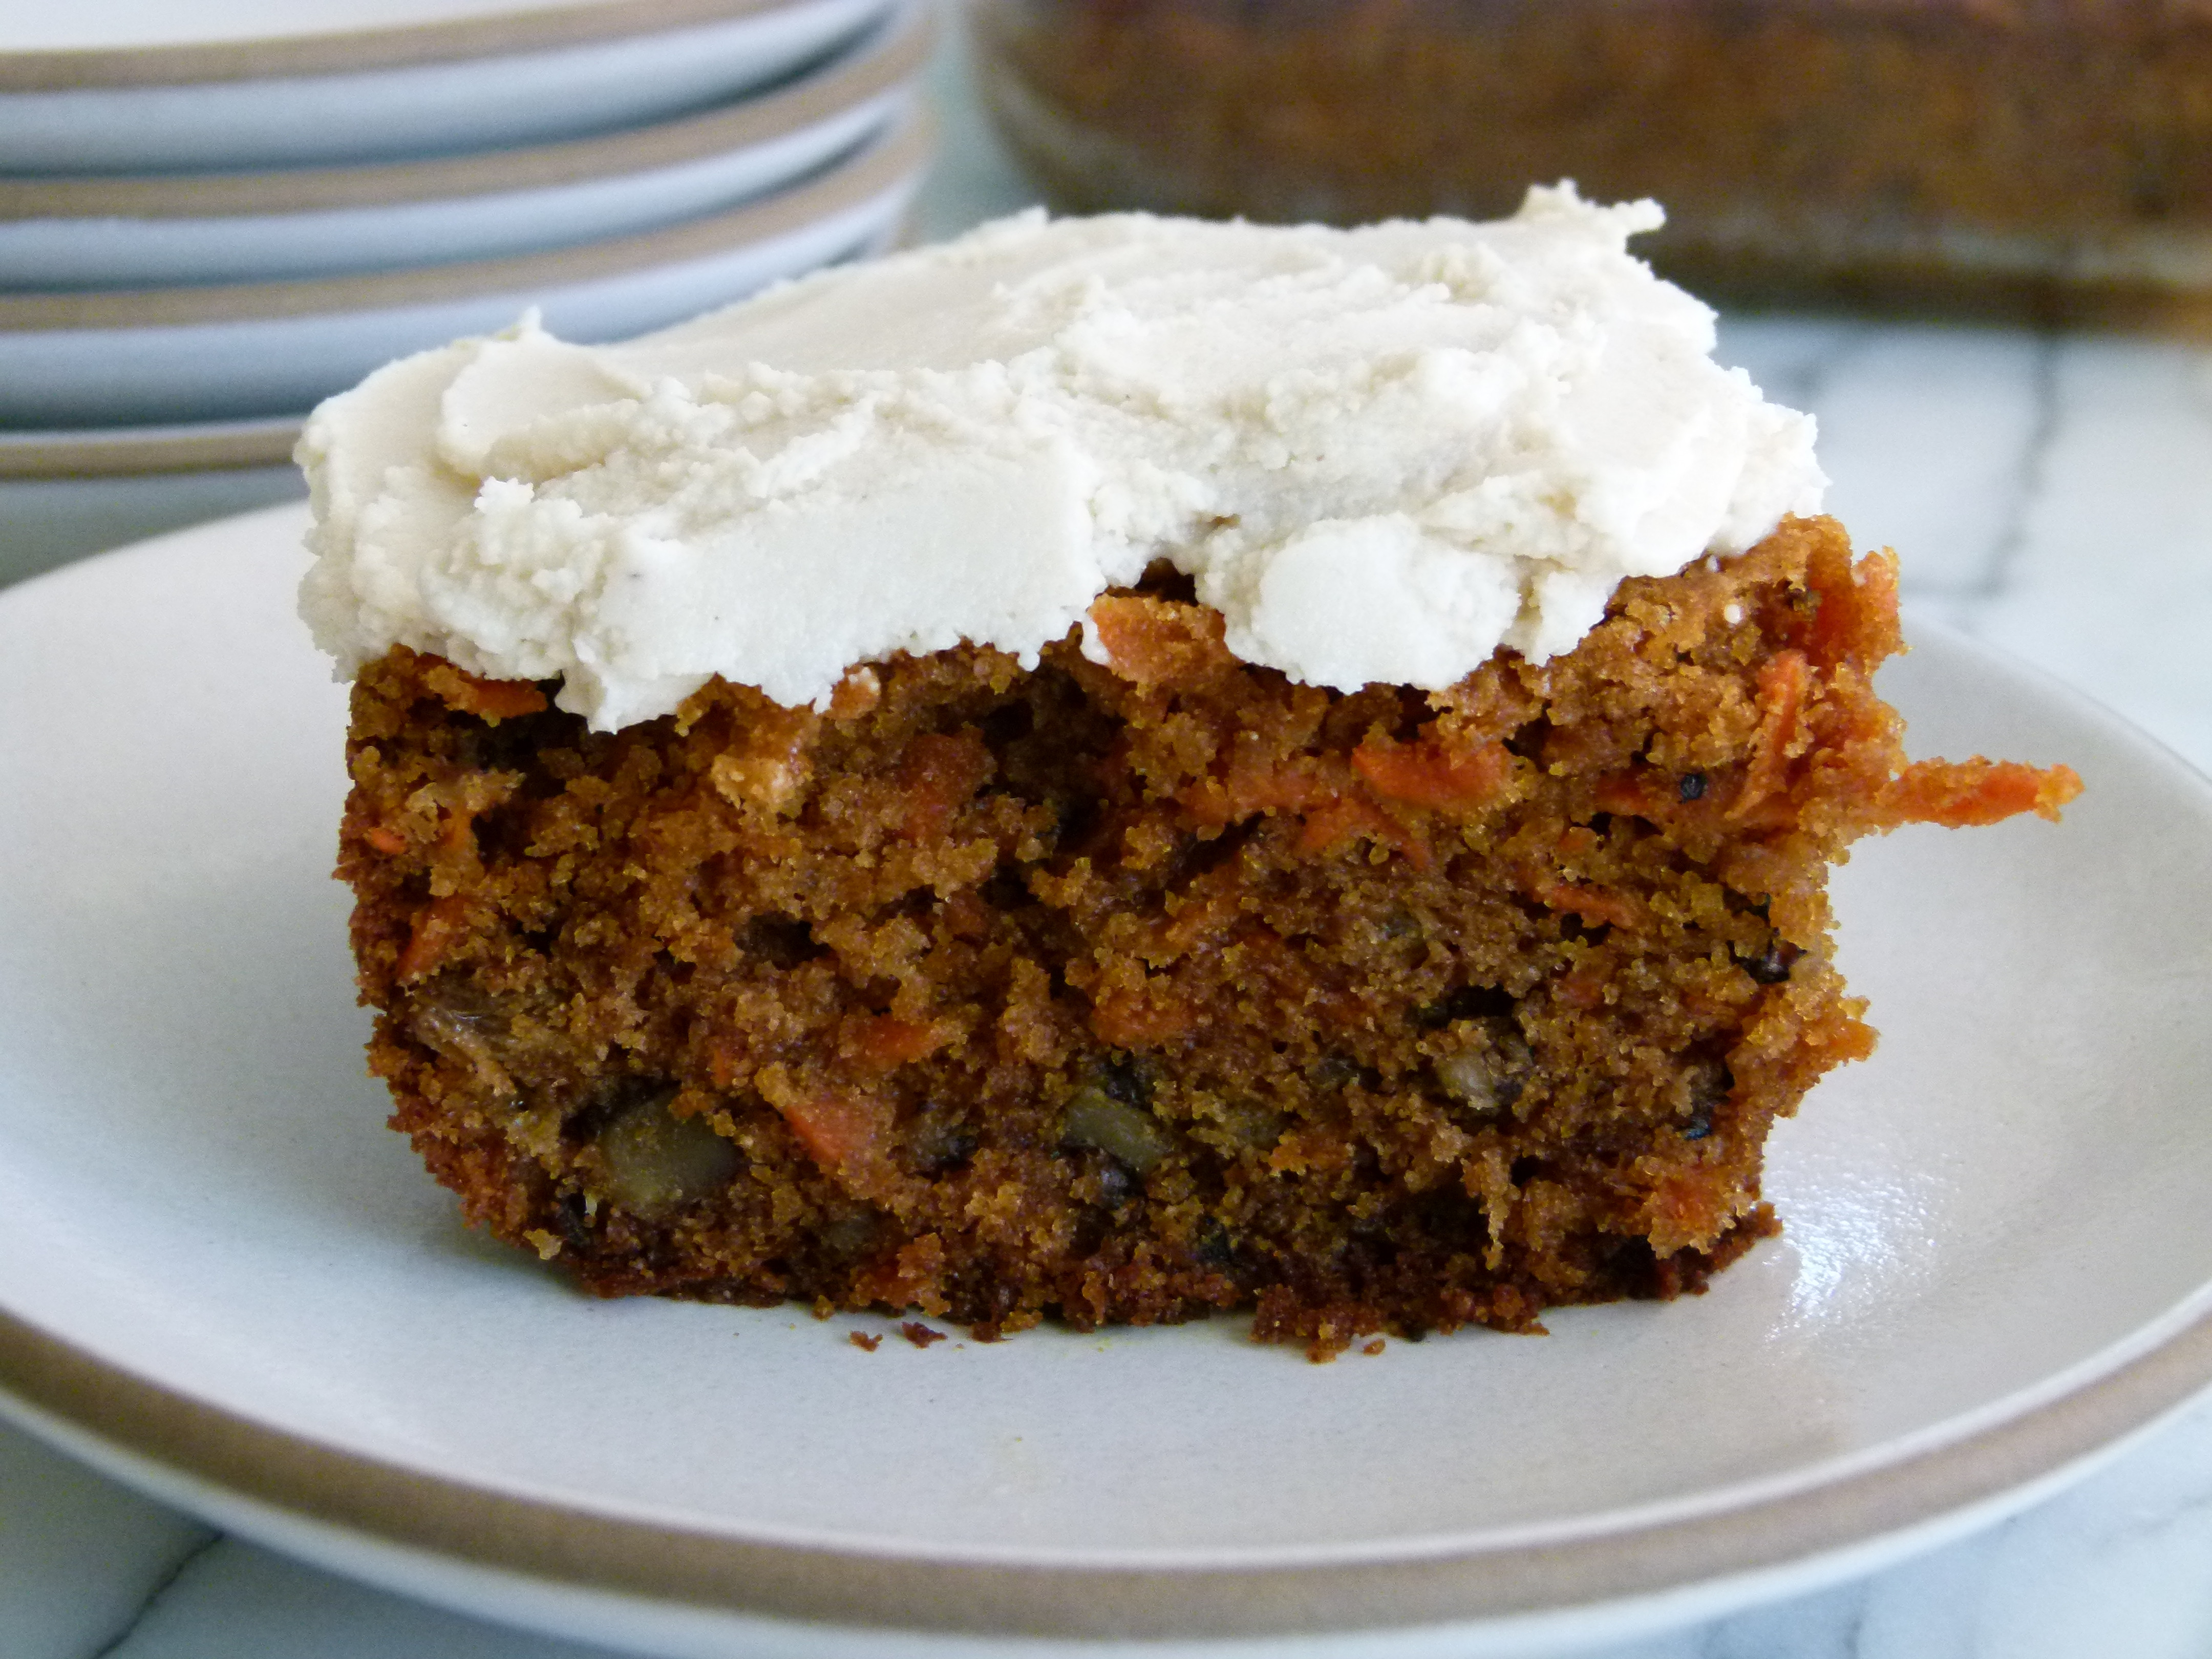 Dairy Free Carrot Cake Frosting
 Whole Wheat Carrot Cake with Dairy Free Frosting Recipe